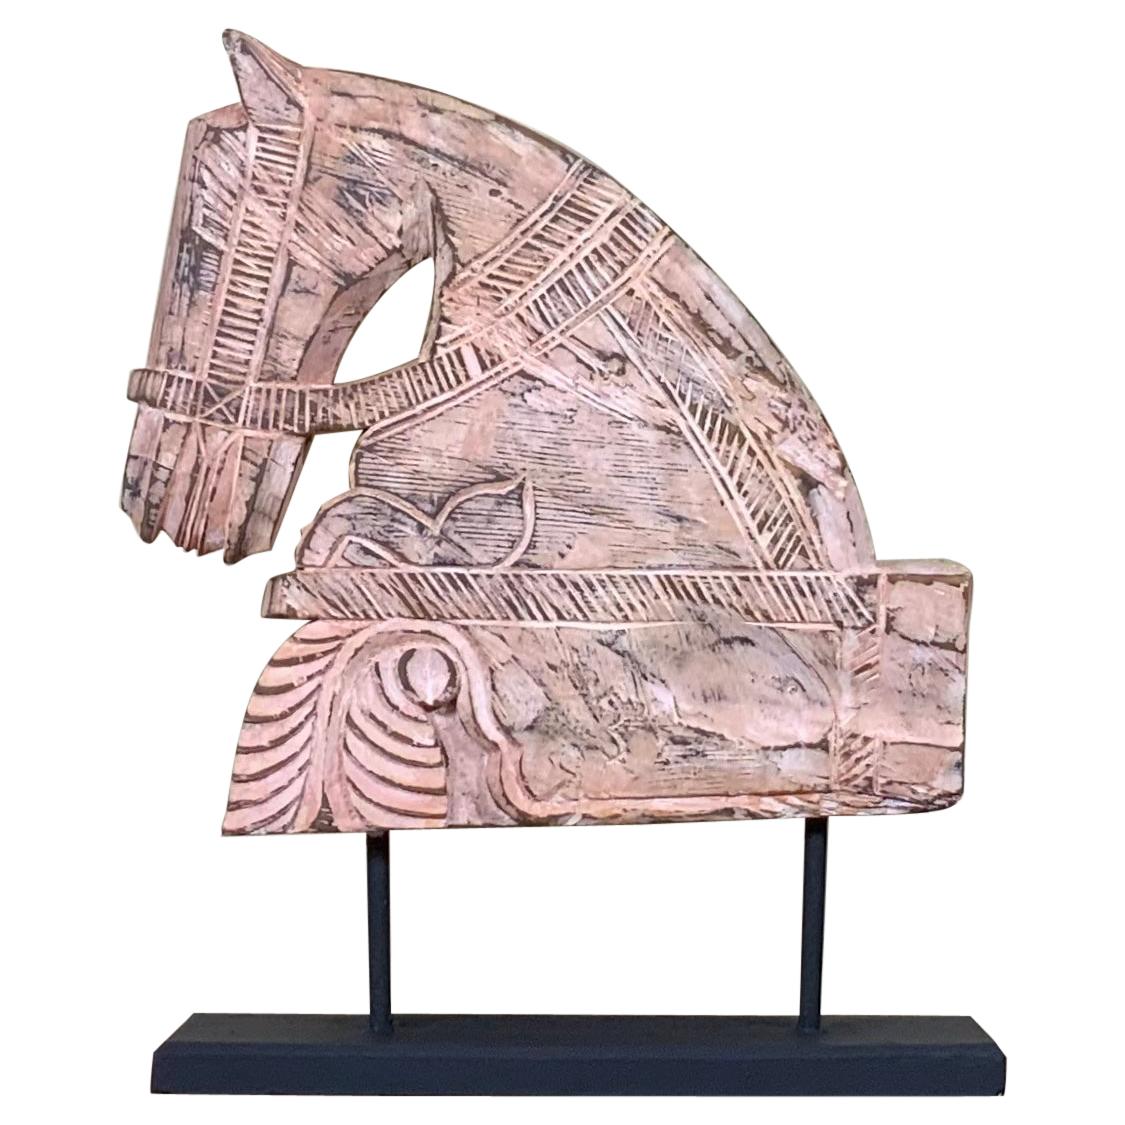 Architectural Hand Carved Wood Horse